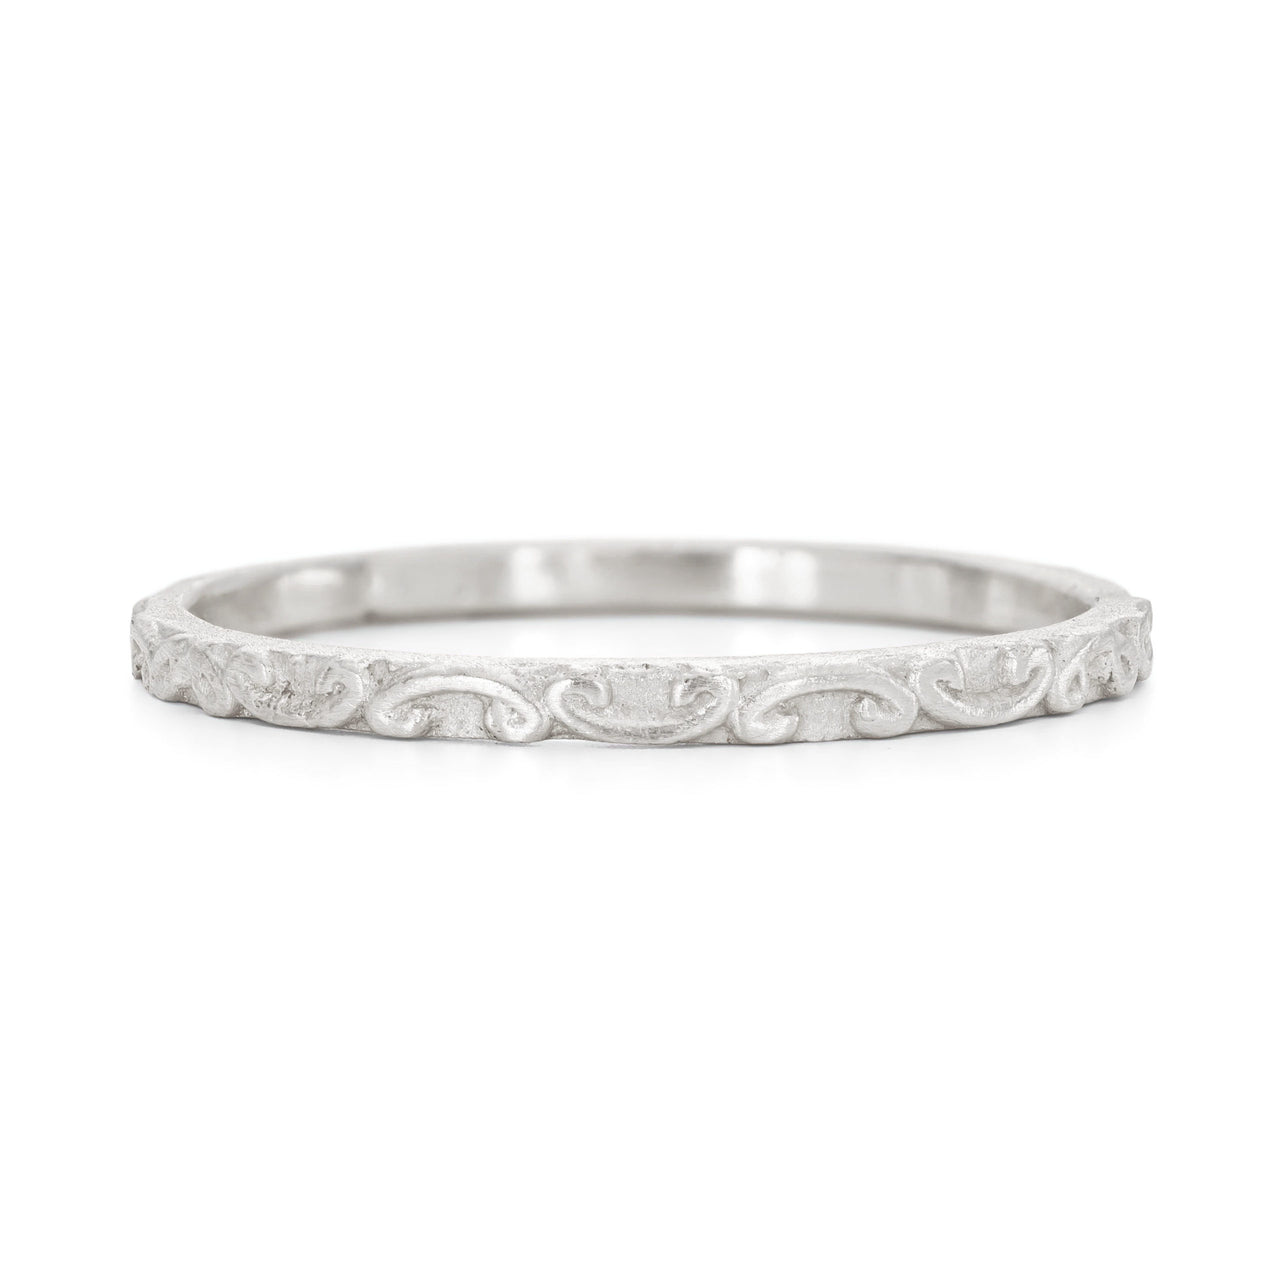 Silver patterned ring